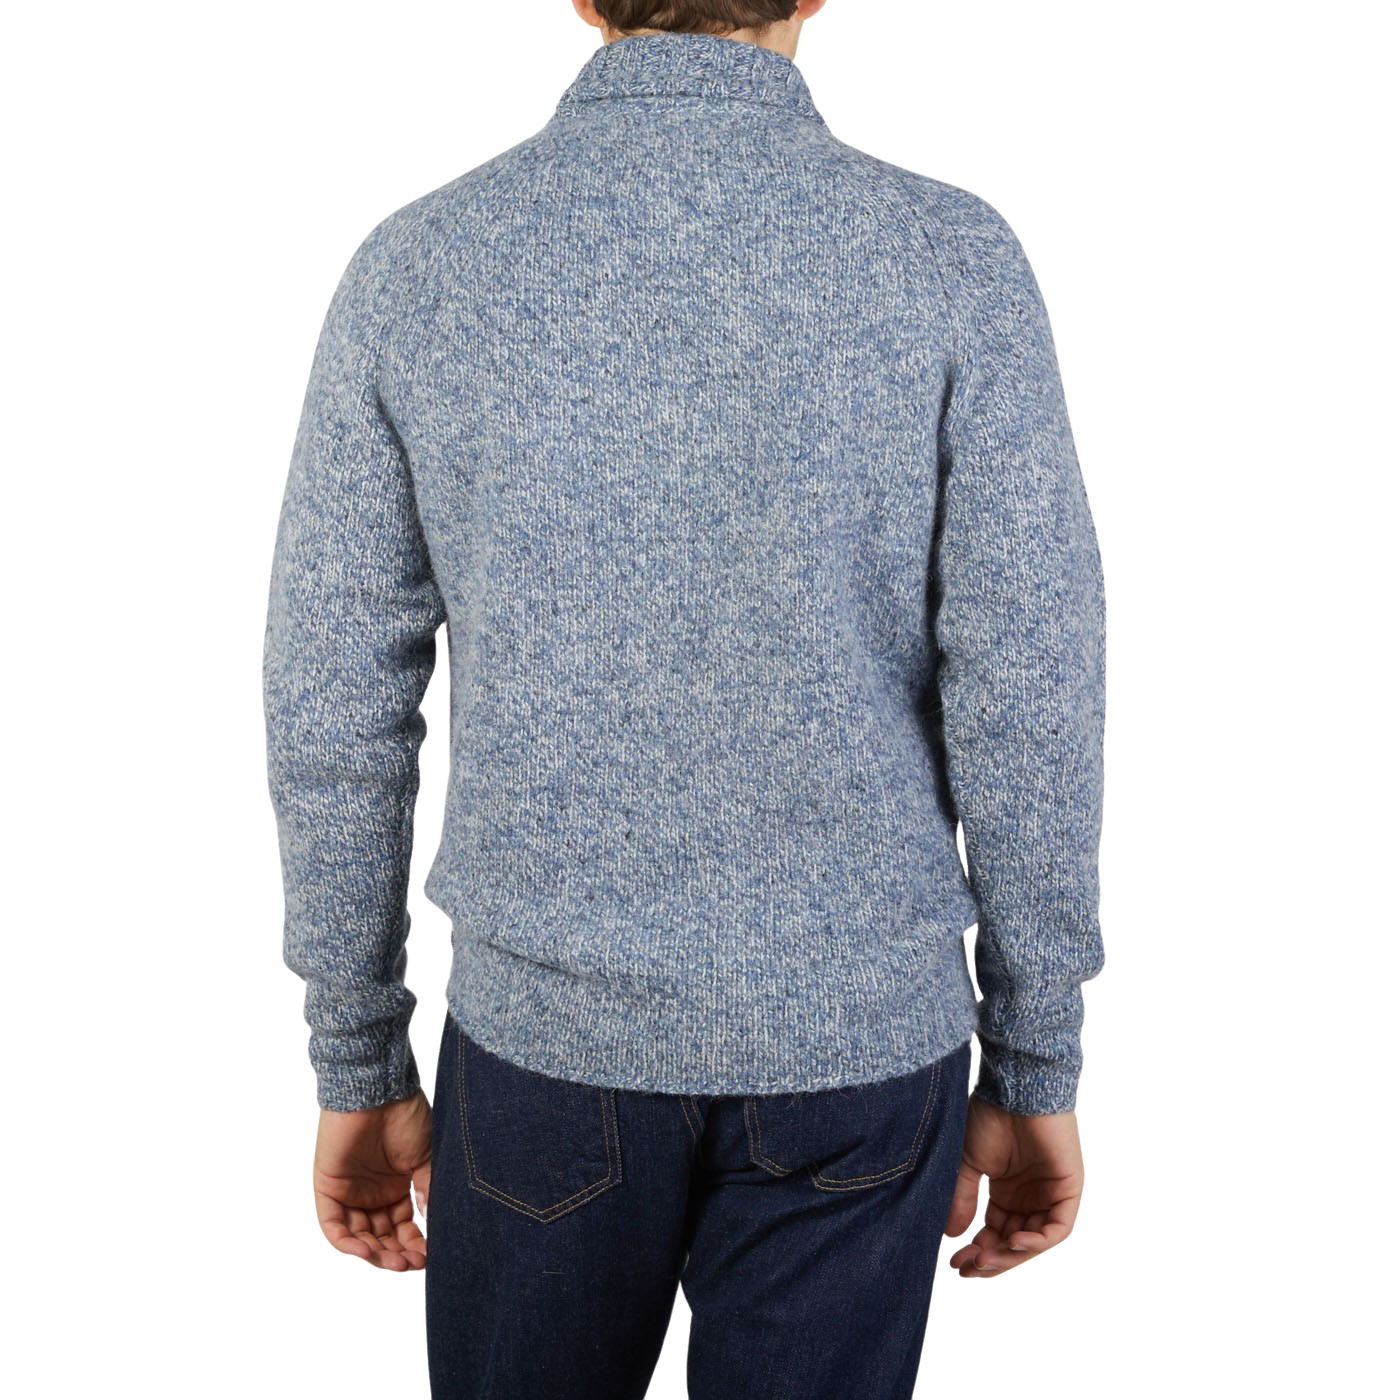 The back view of a man wearing an Alan Paine regular fit, Blue Spreckle Wool Alpaca Tweed Roll Neck sweater.